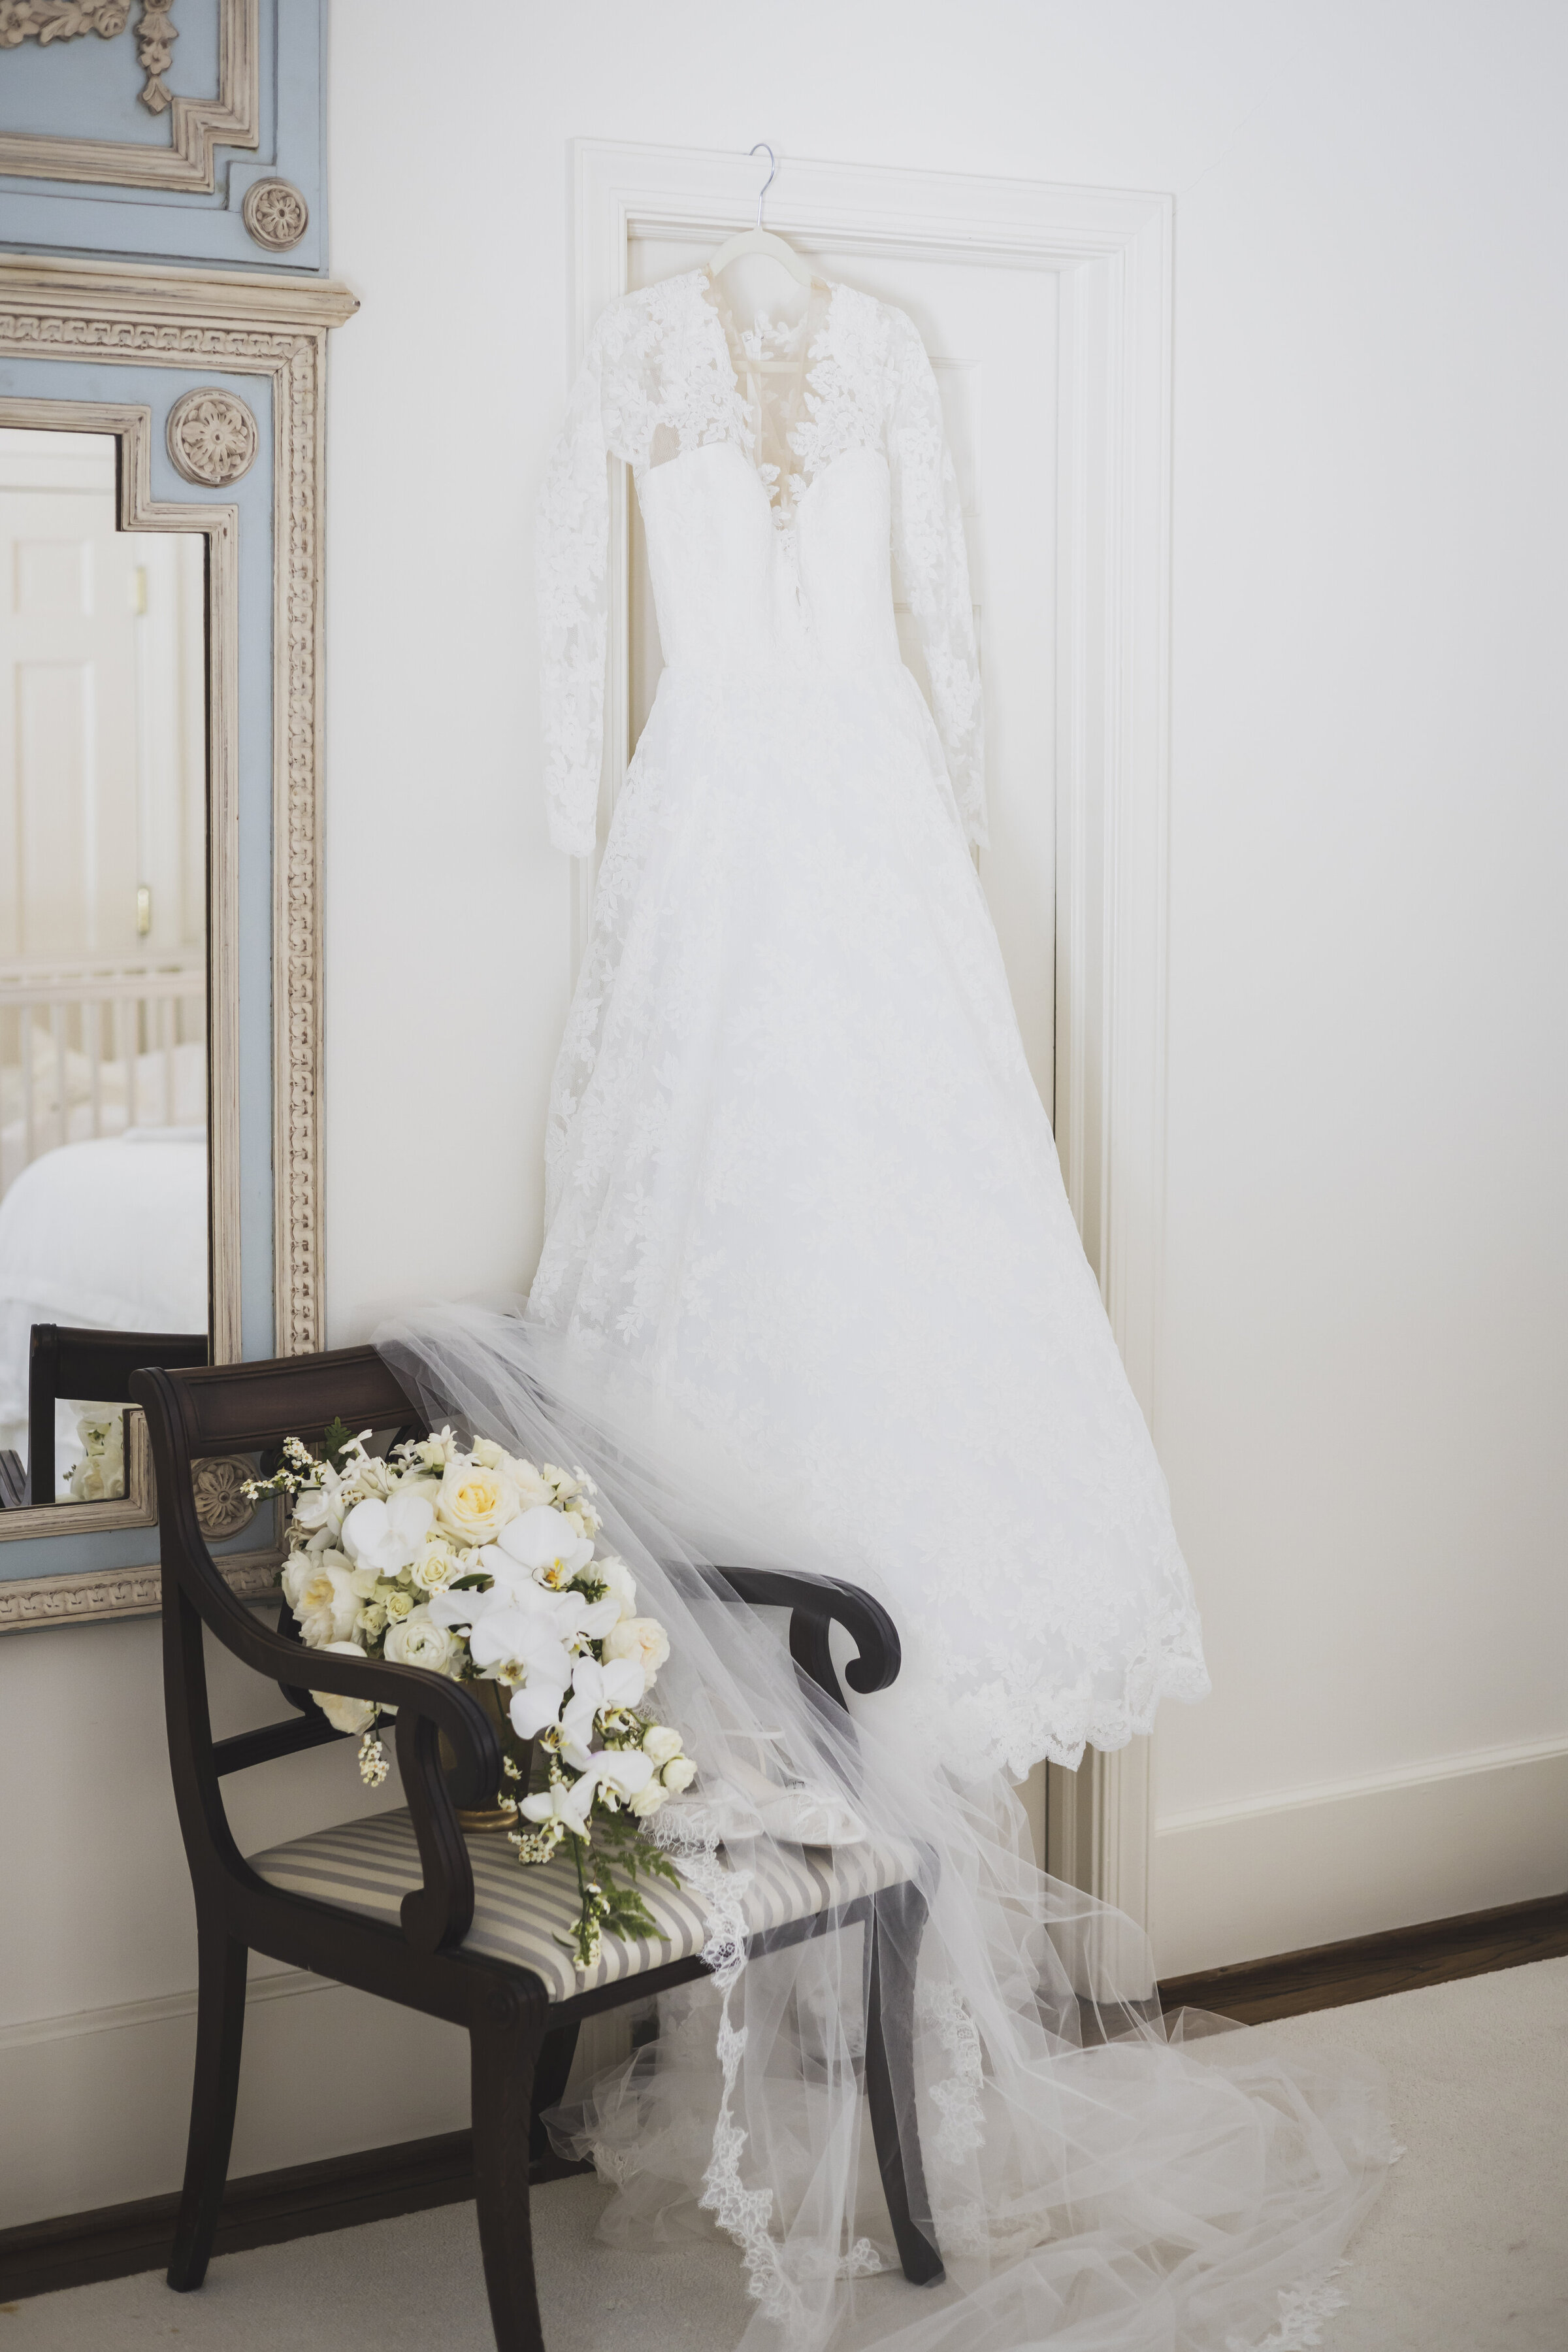 Wedding dress  hanging over chair with bouquet.